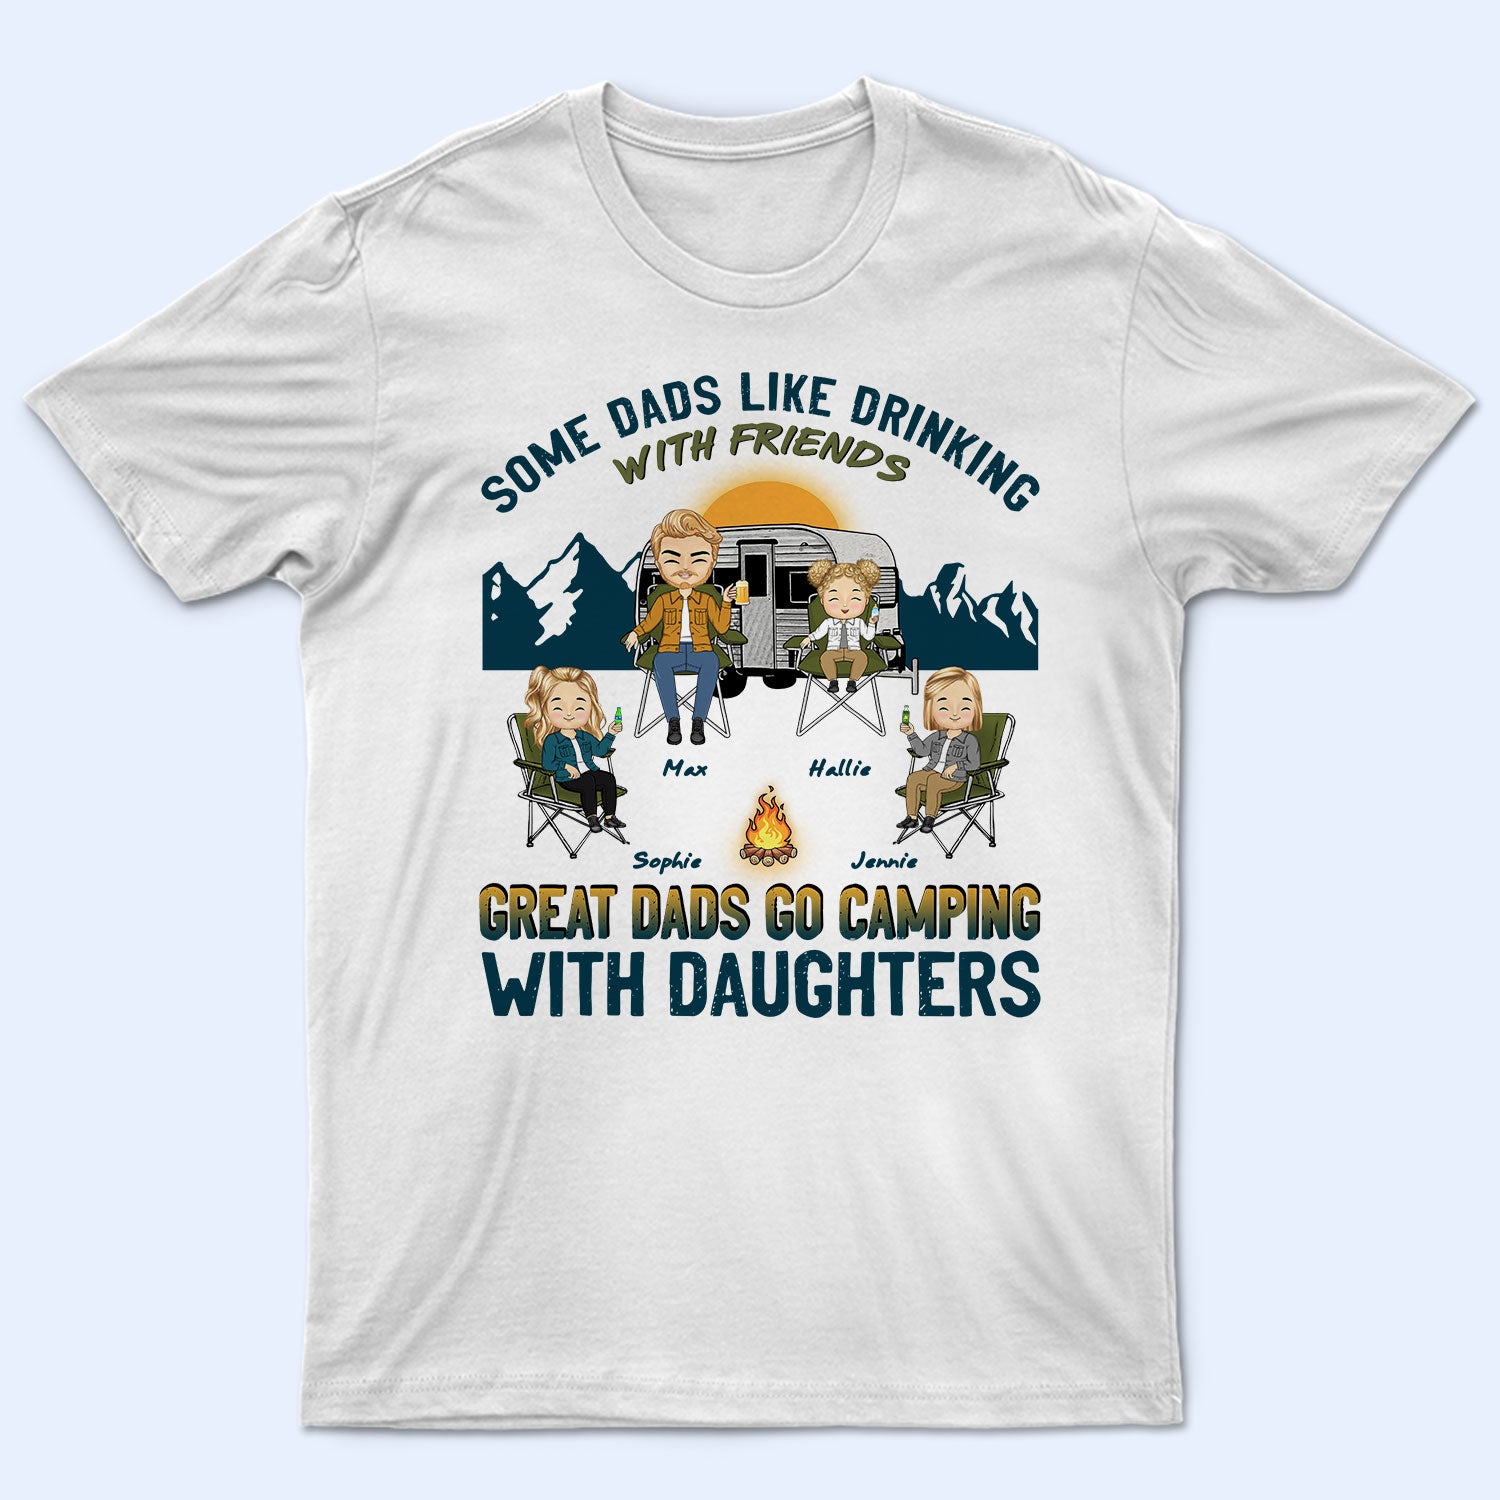 Go Camping With Daughters - Gift For Father - Personalized Custom T Shirt